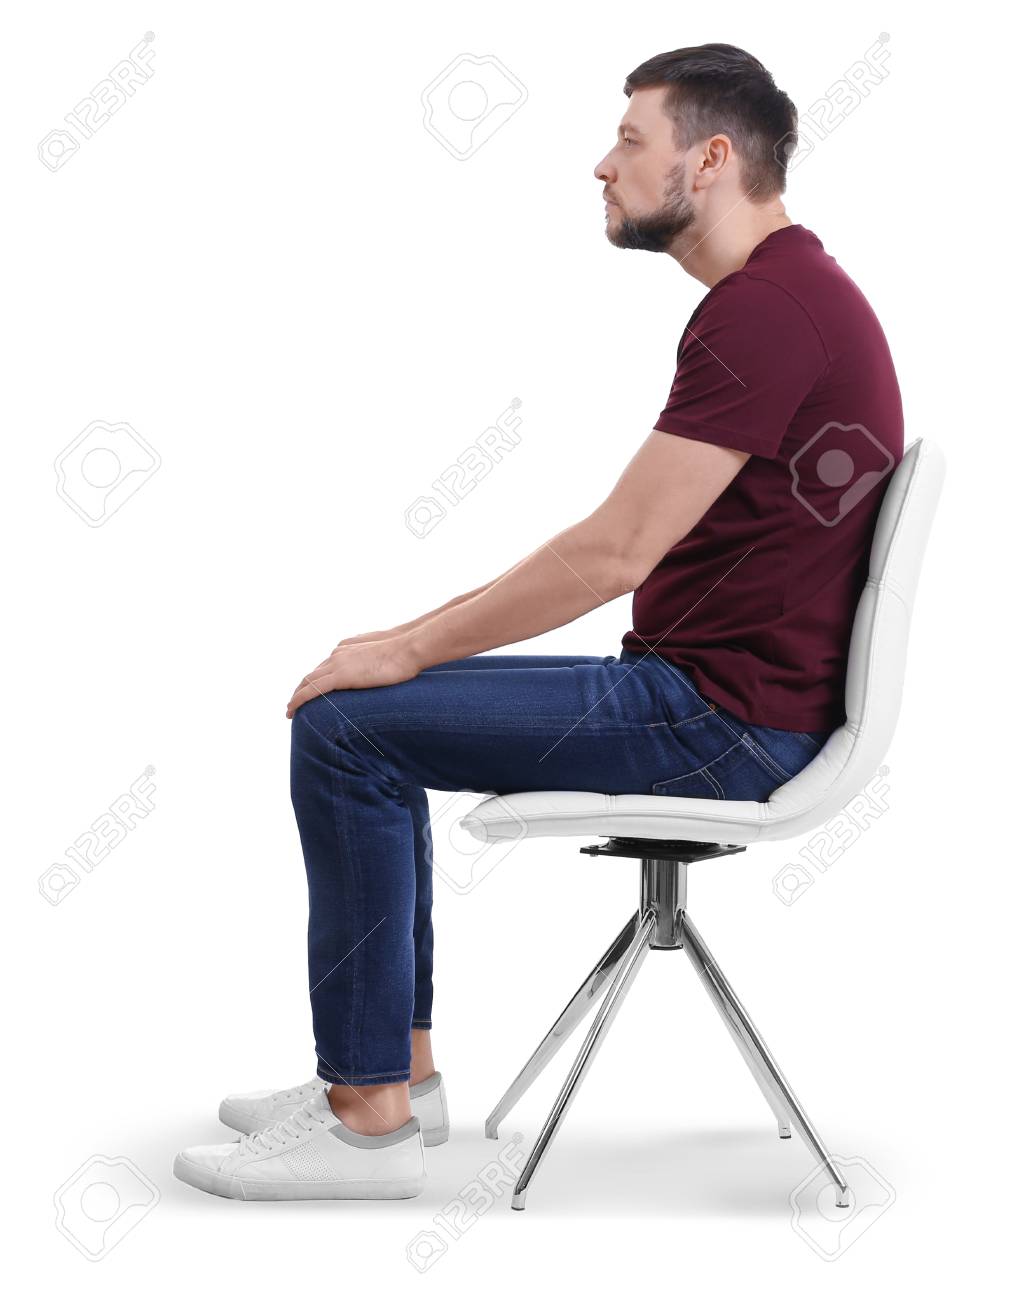 Posture Concept Man Sitting On Chair Against White Background